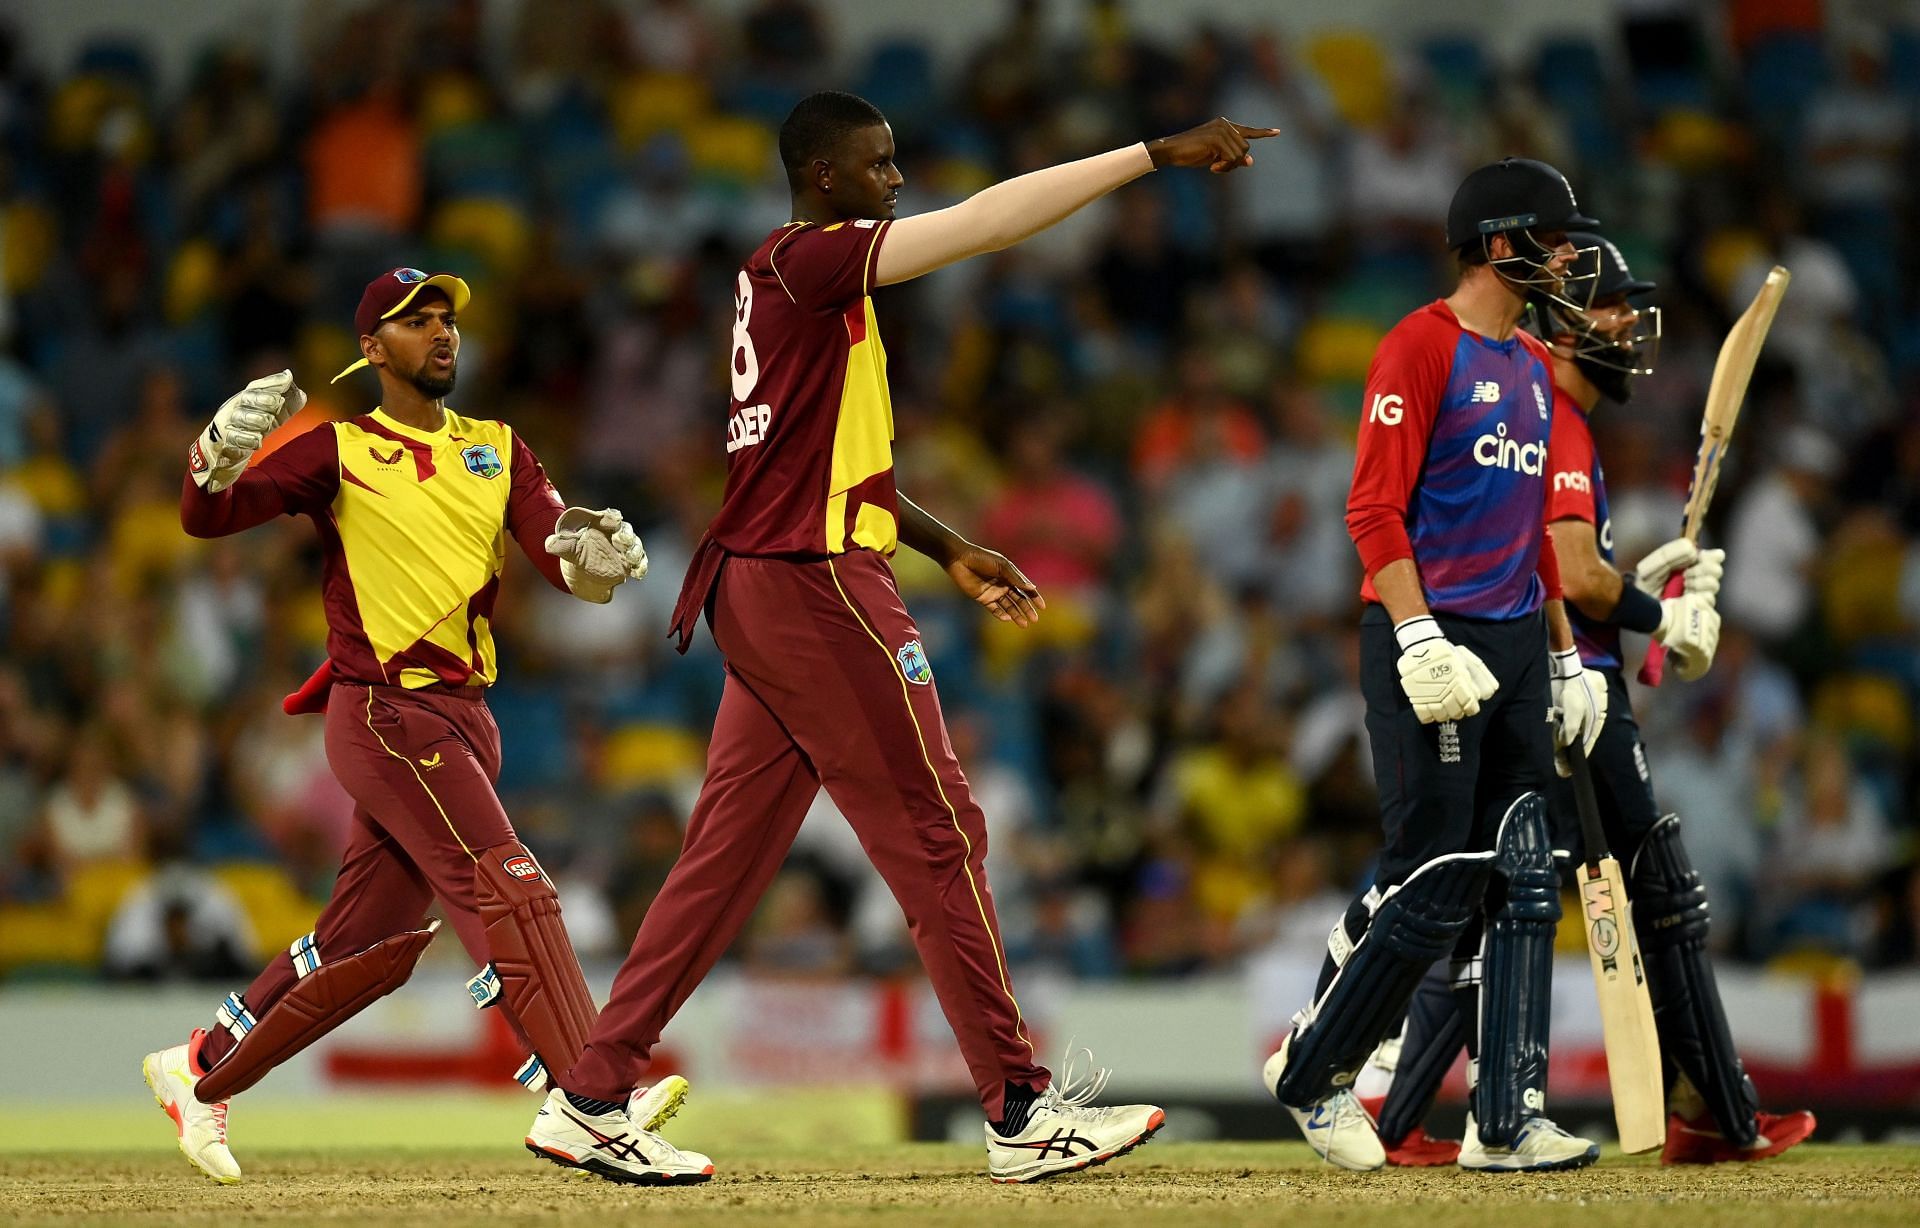 Jason Holder celebrates a wicket against England in the 5th T20I. Pic: Getty Images